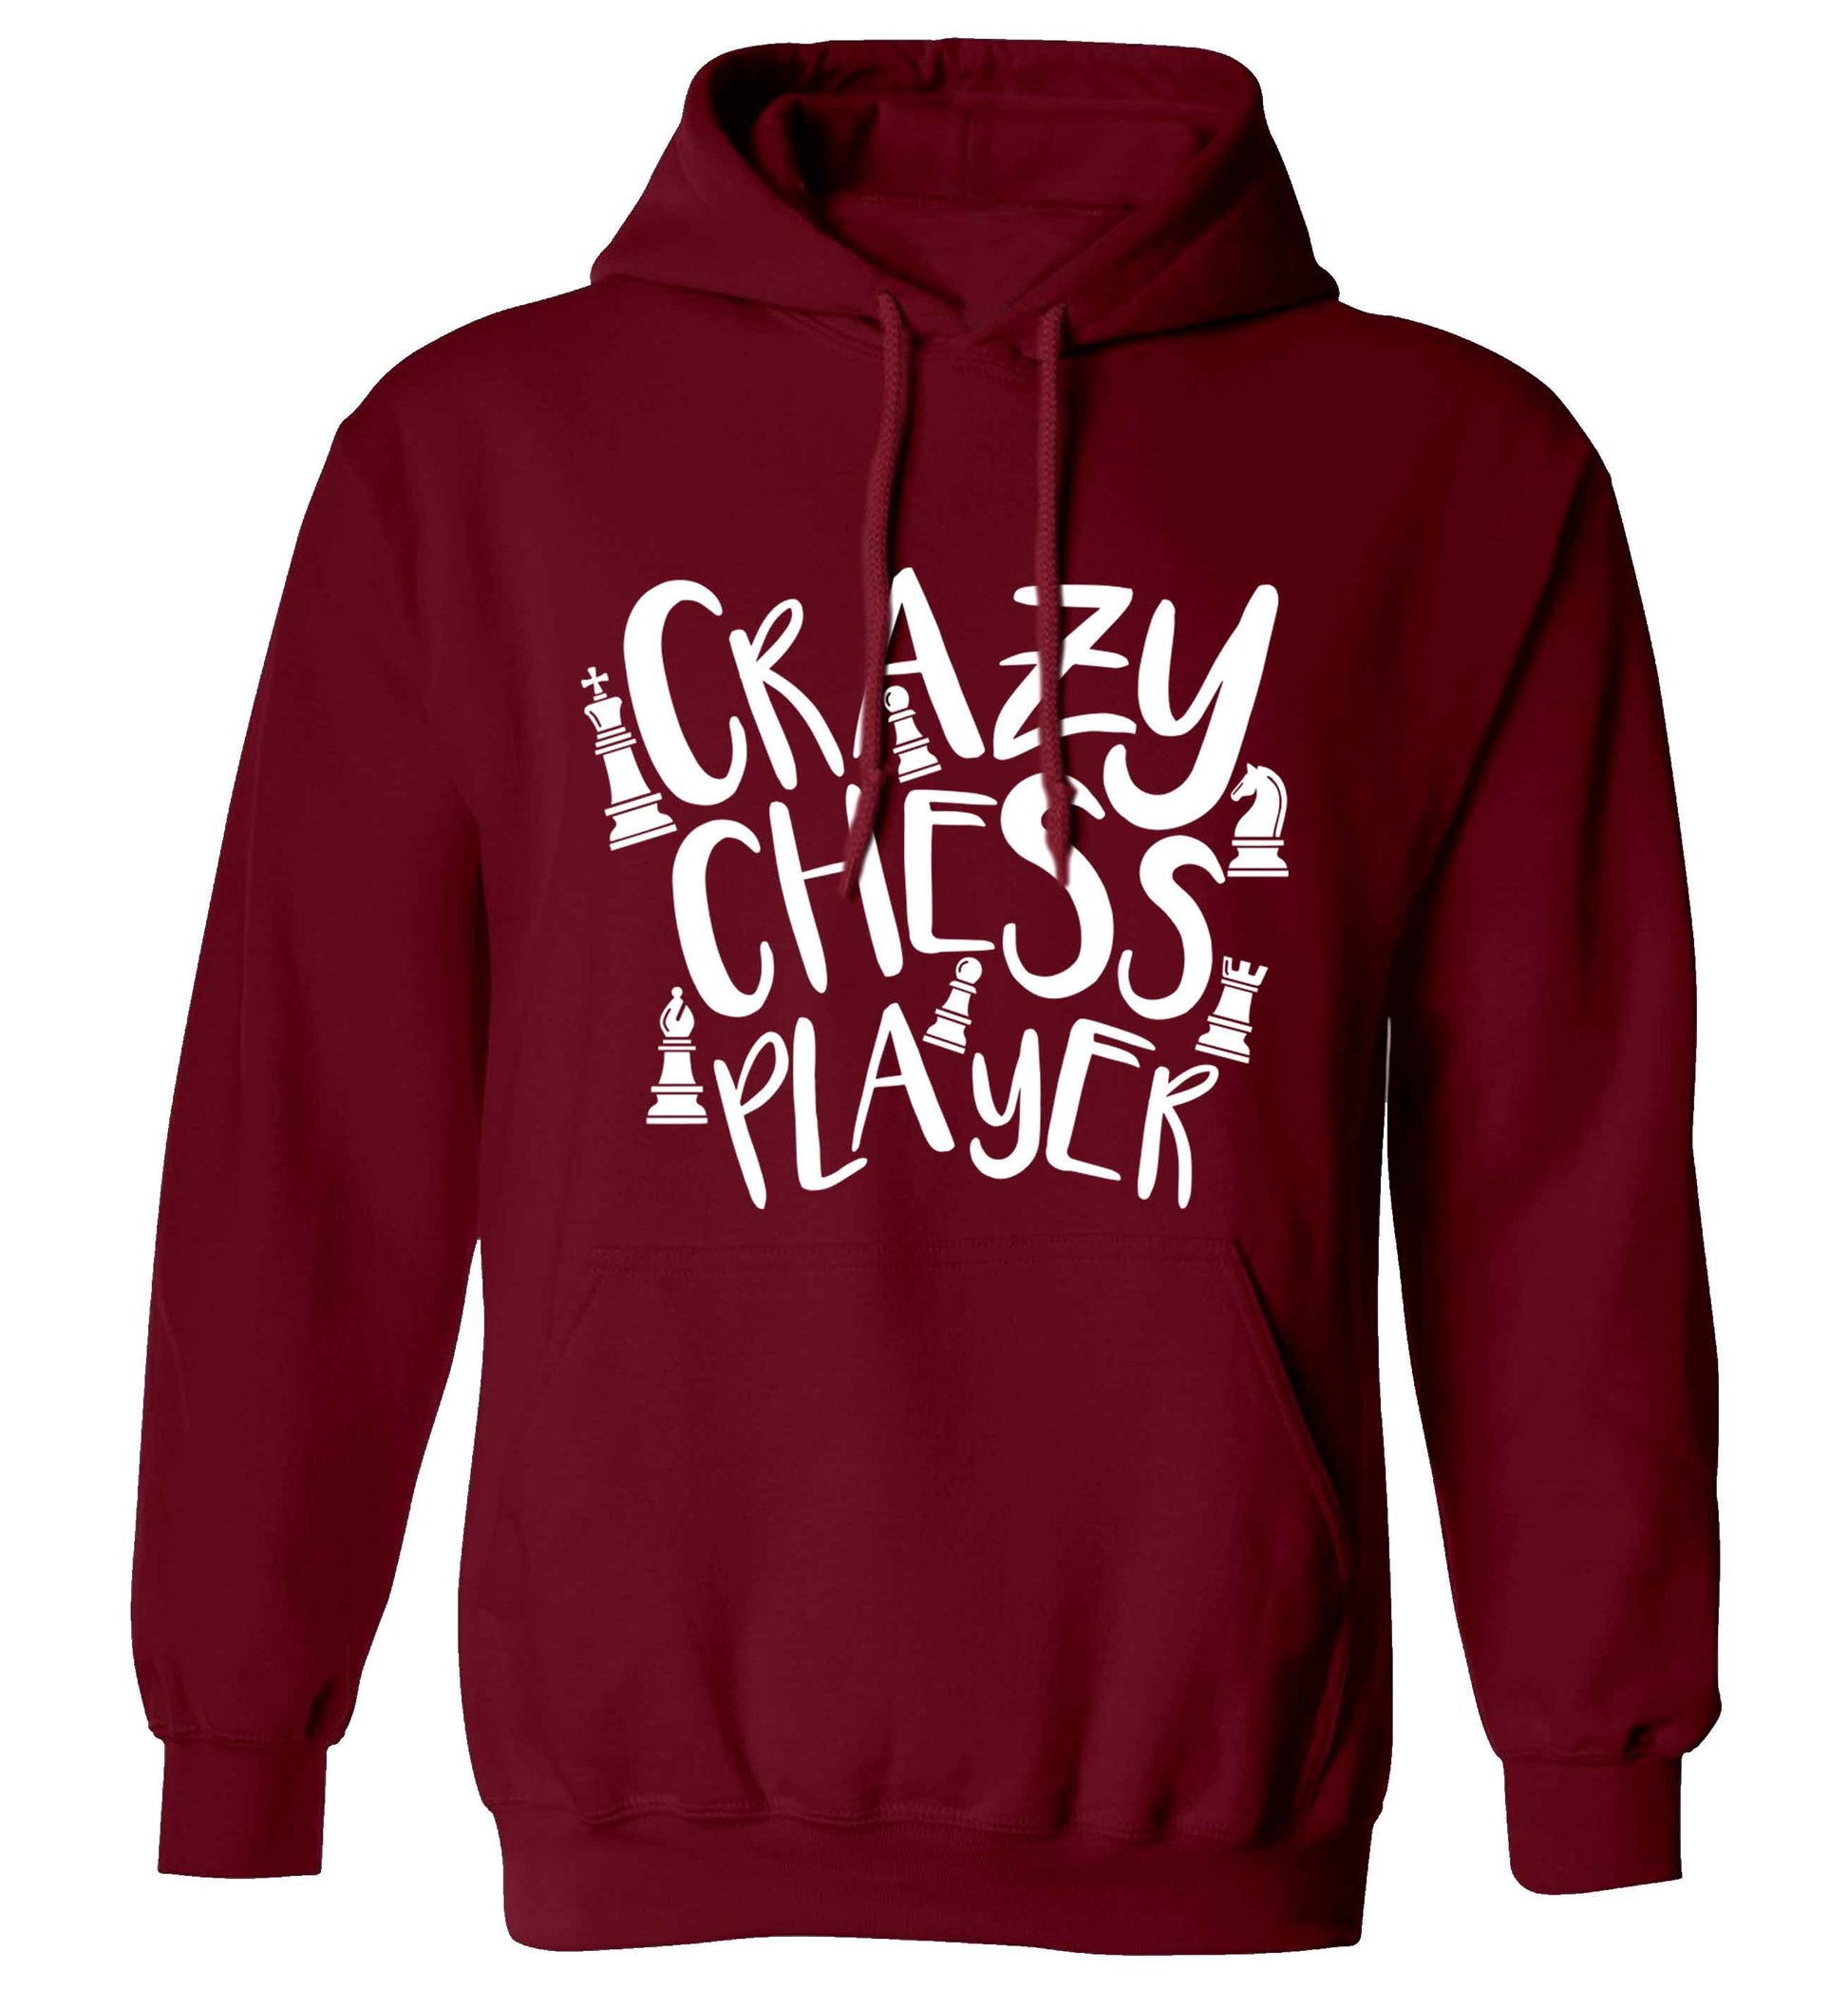 Crazy chess player adults unisex maroon hoodie 2XL